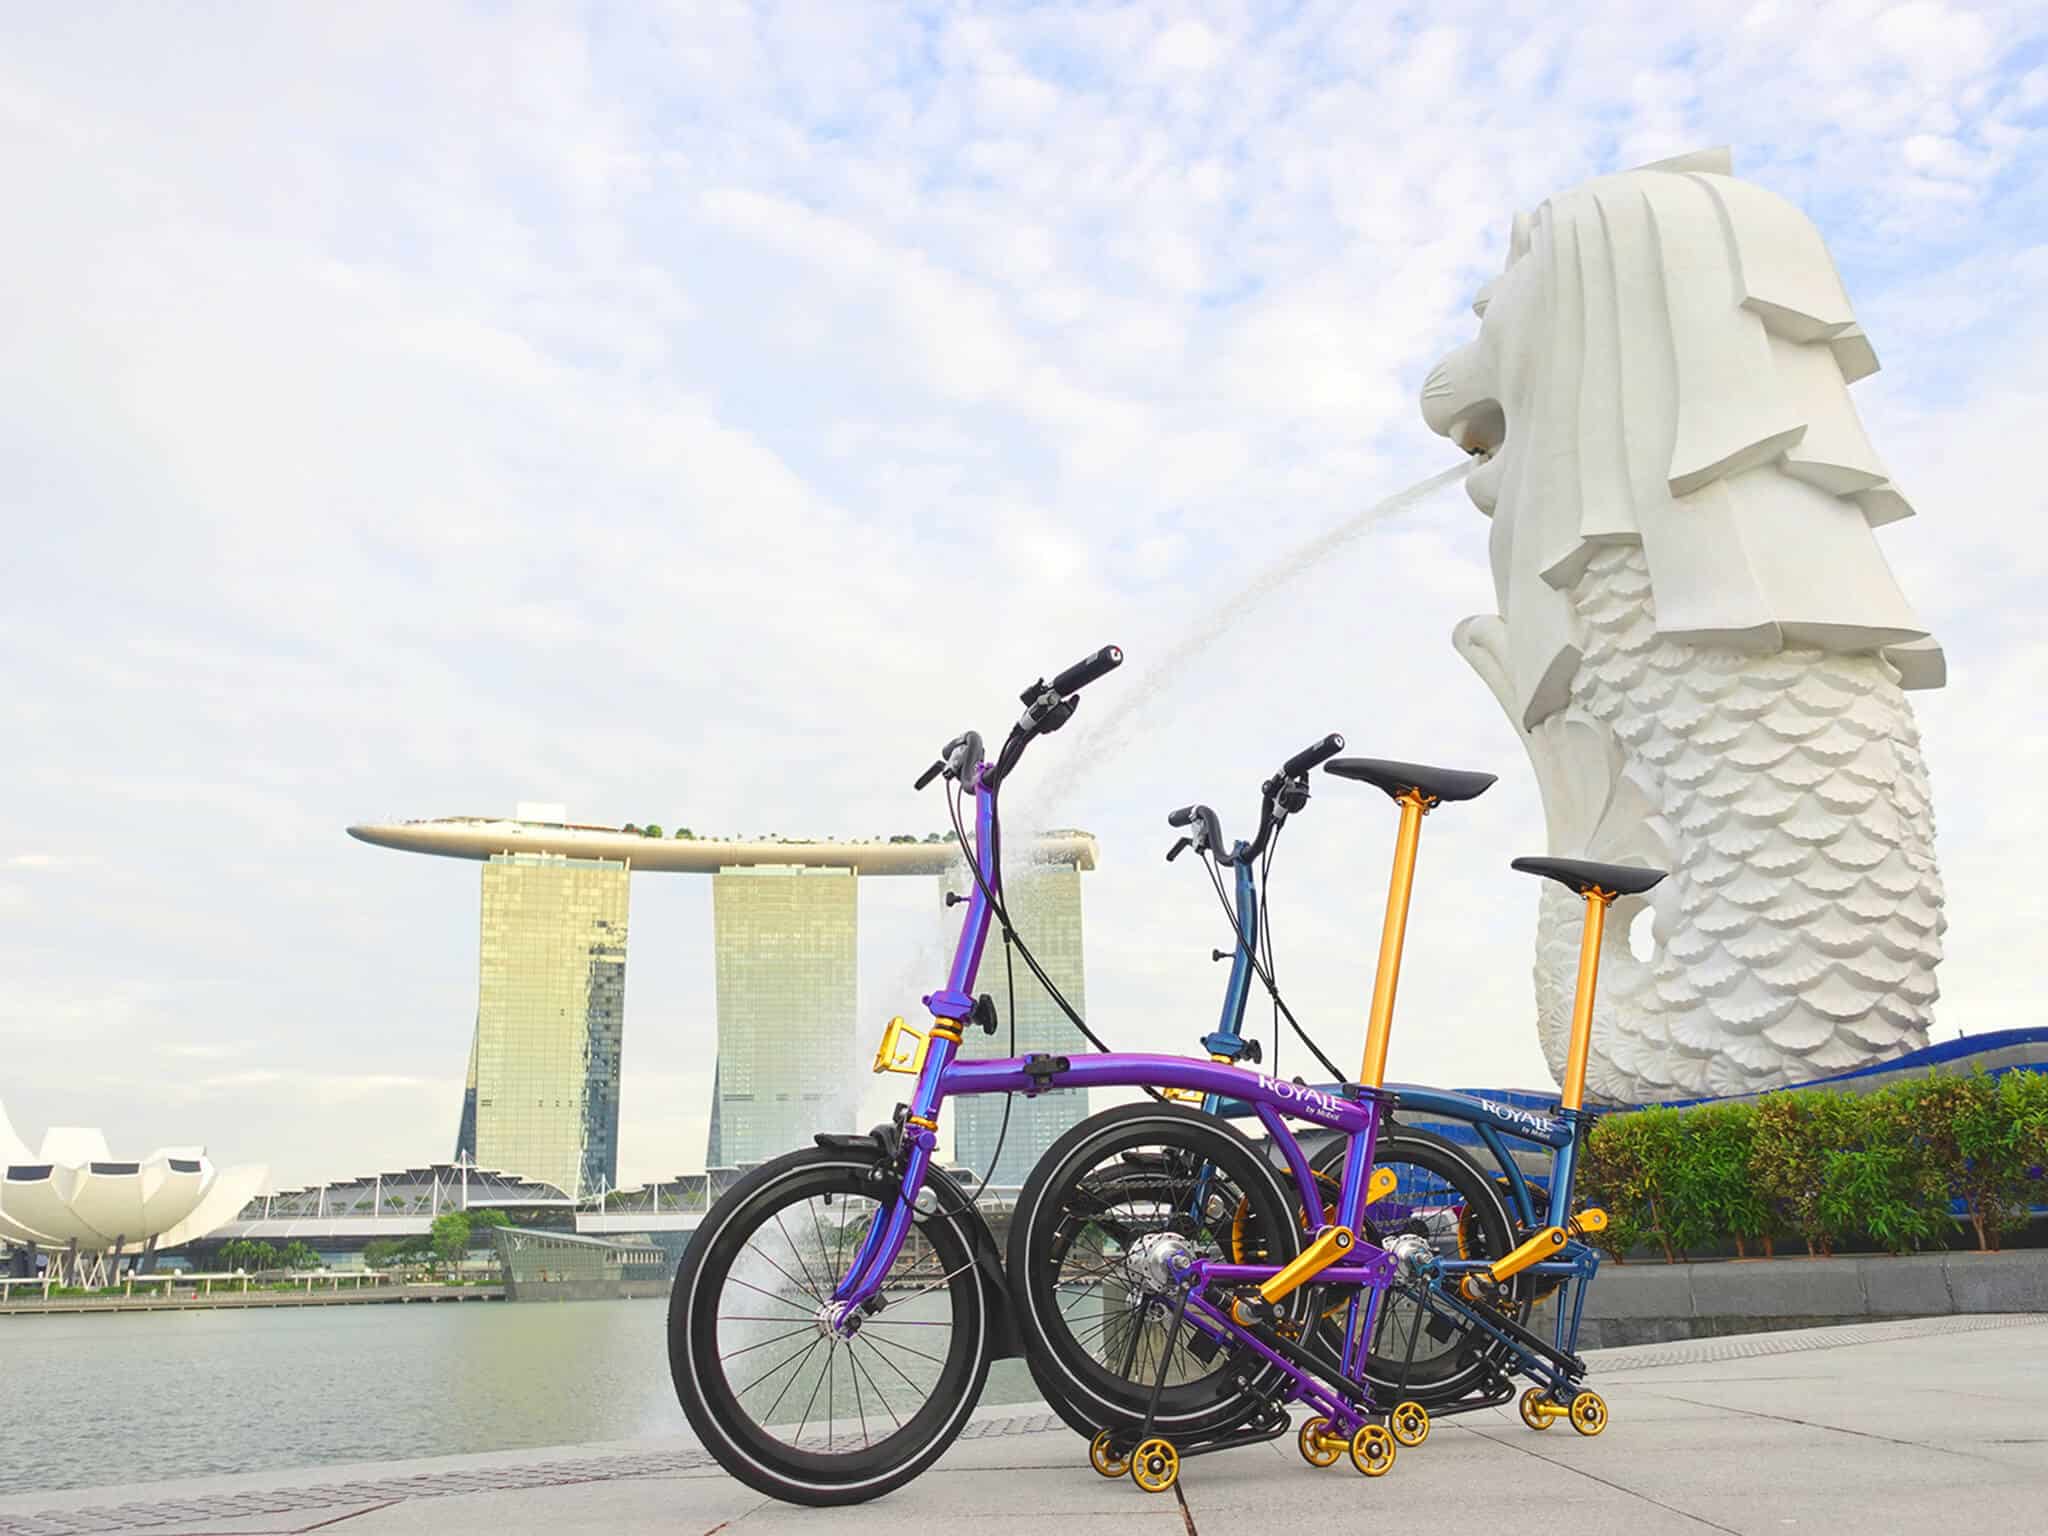 Royale GT M9 METALLIC PURPLE NAVY BLUE Foldable Bicycle Gold Edition at Merlion Park  - Top 8 Cycling Routes On A Foldable Bicycle In Singapore